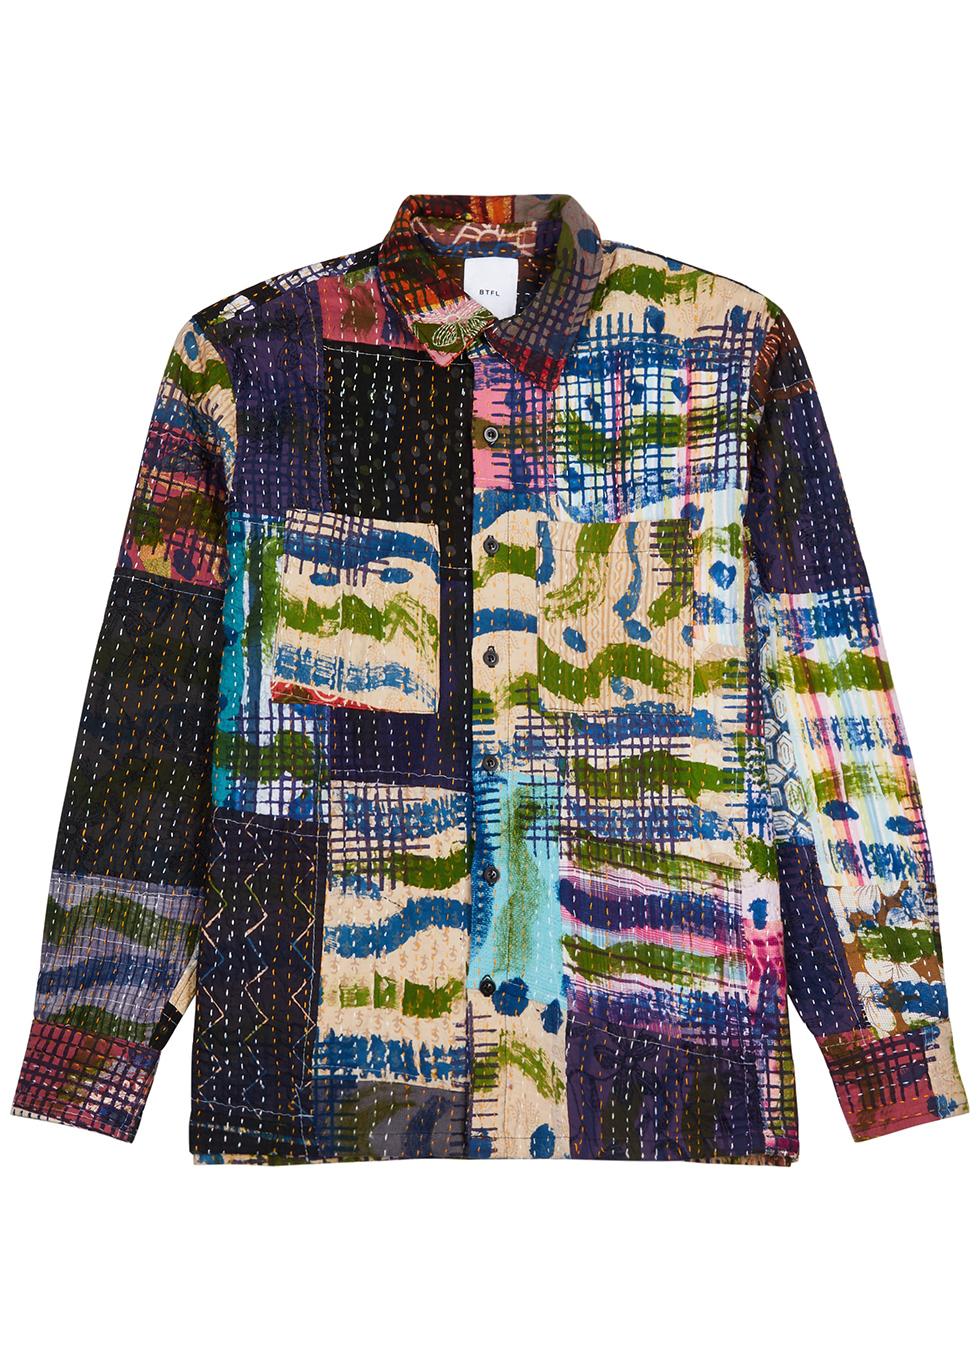 Patchwork embroidered shirt by BTFL